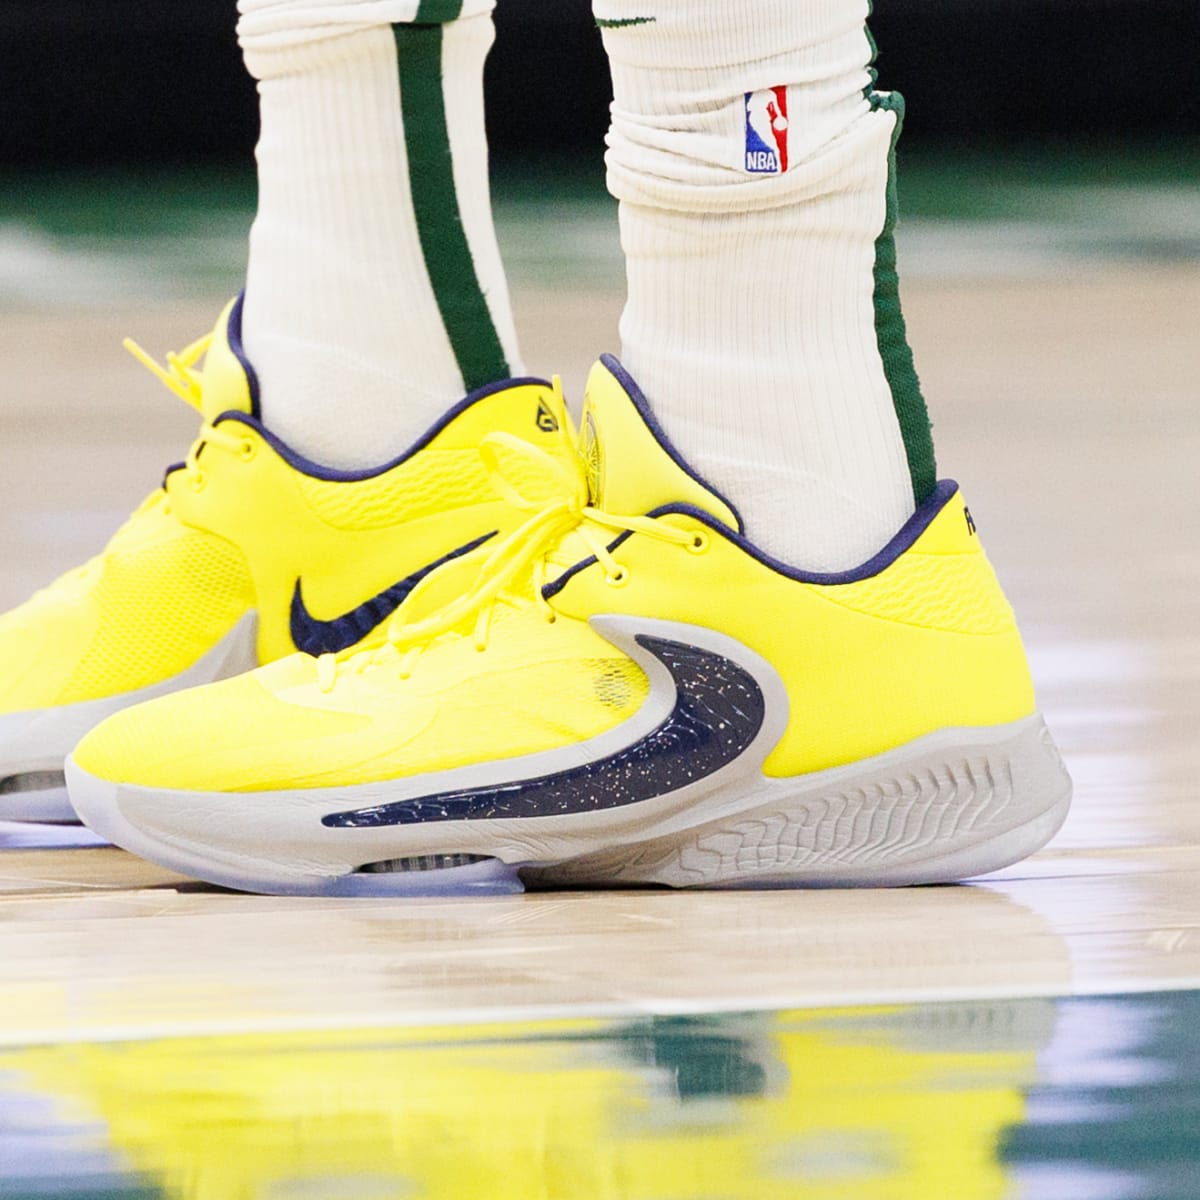 taal mout ondersteboven Highlighting Four New Shoes Worn in the NBA Last Night - Sports Illustrated  FanNation Kicks News, Analysis and More